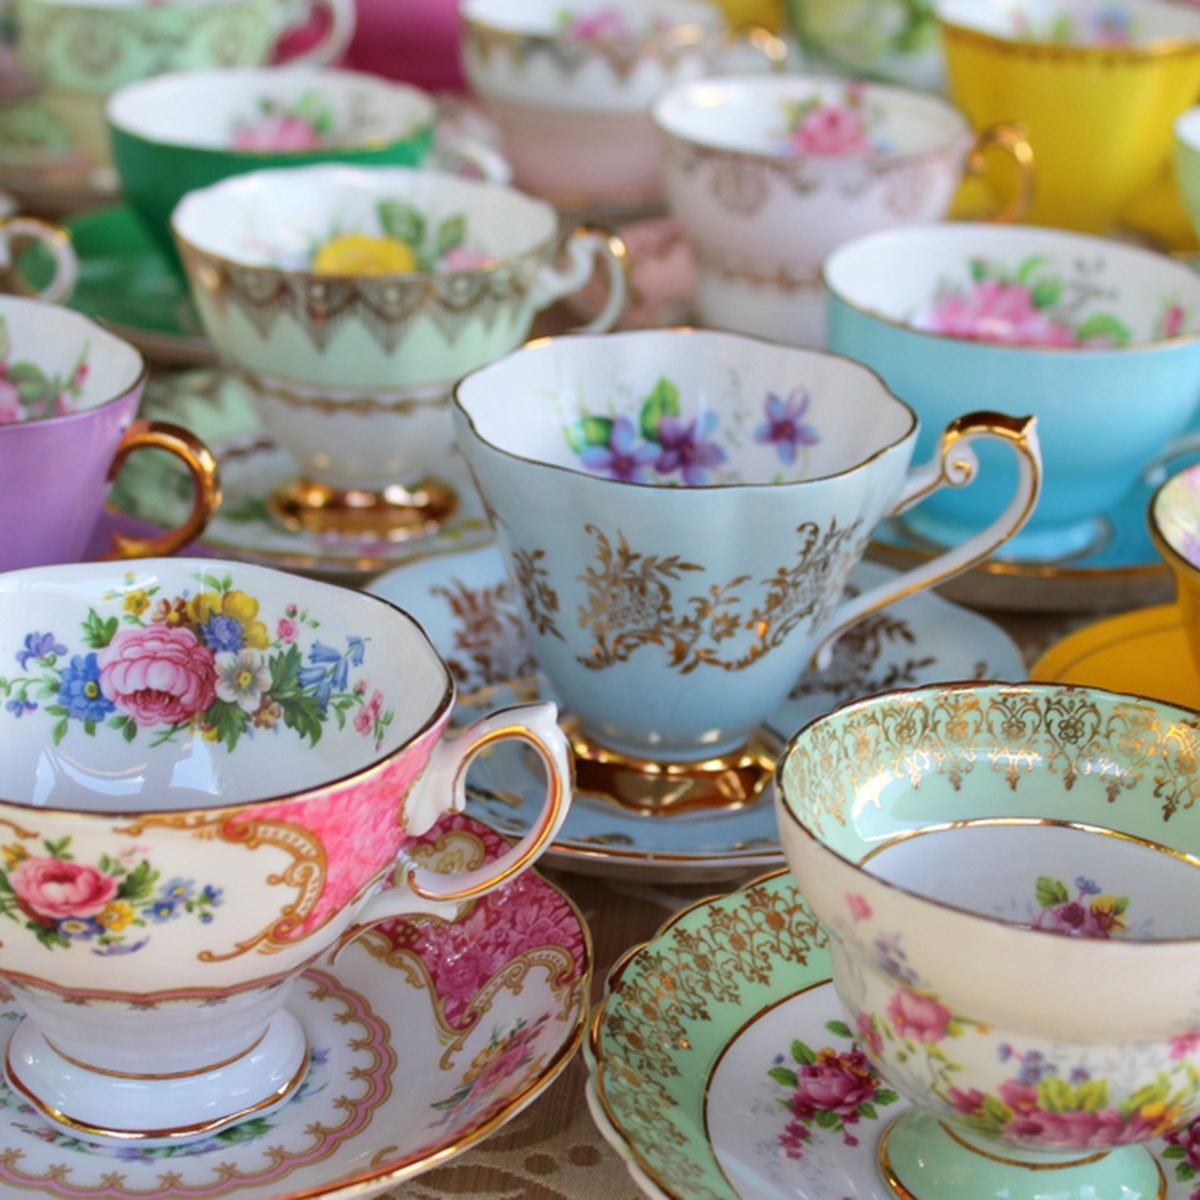 10 Cleaver Ways to UpCycle Your Vintage Teacups